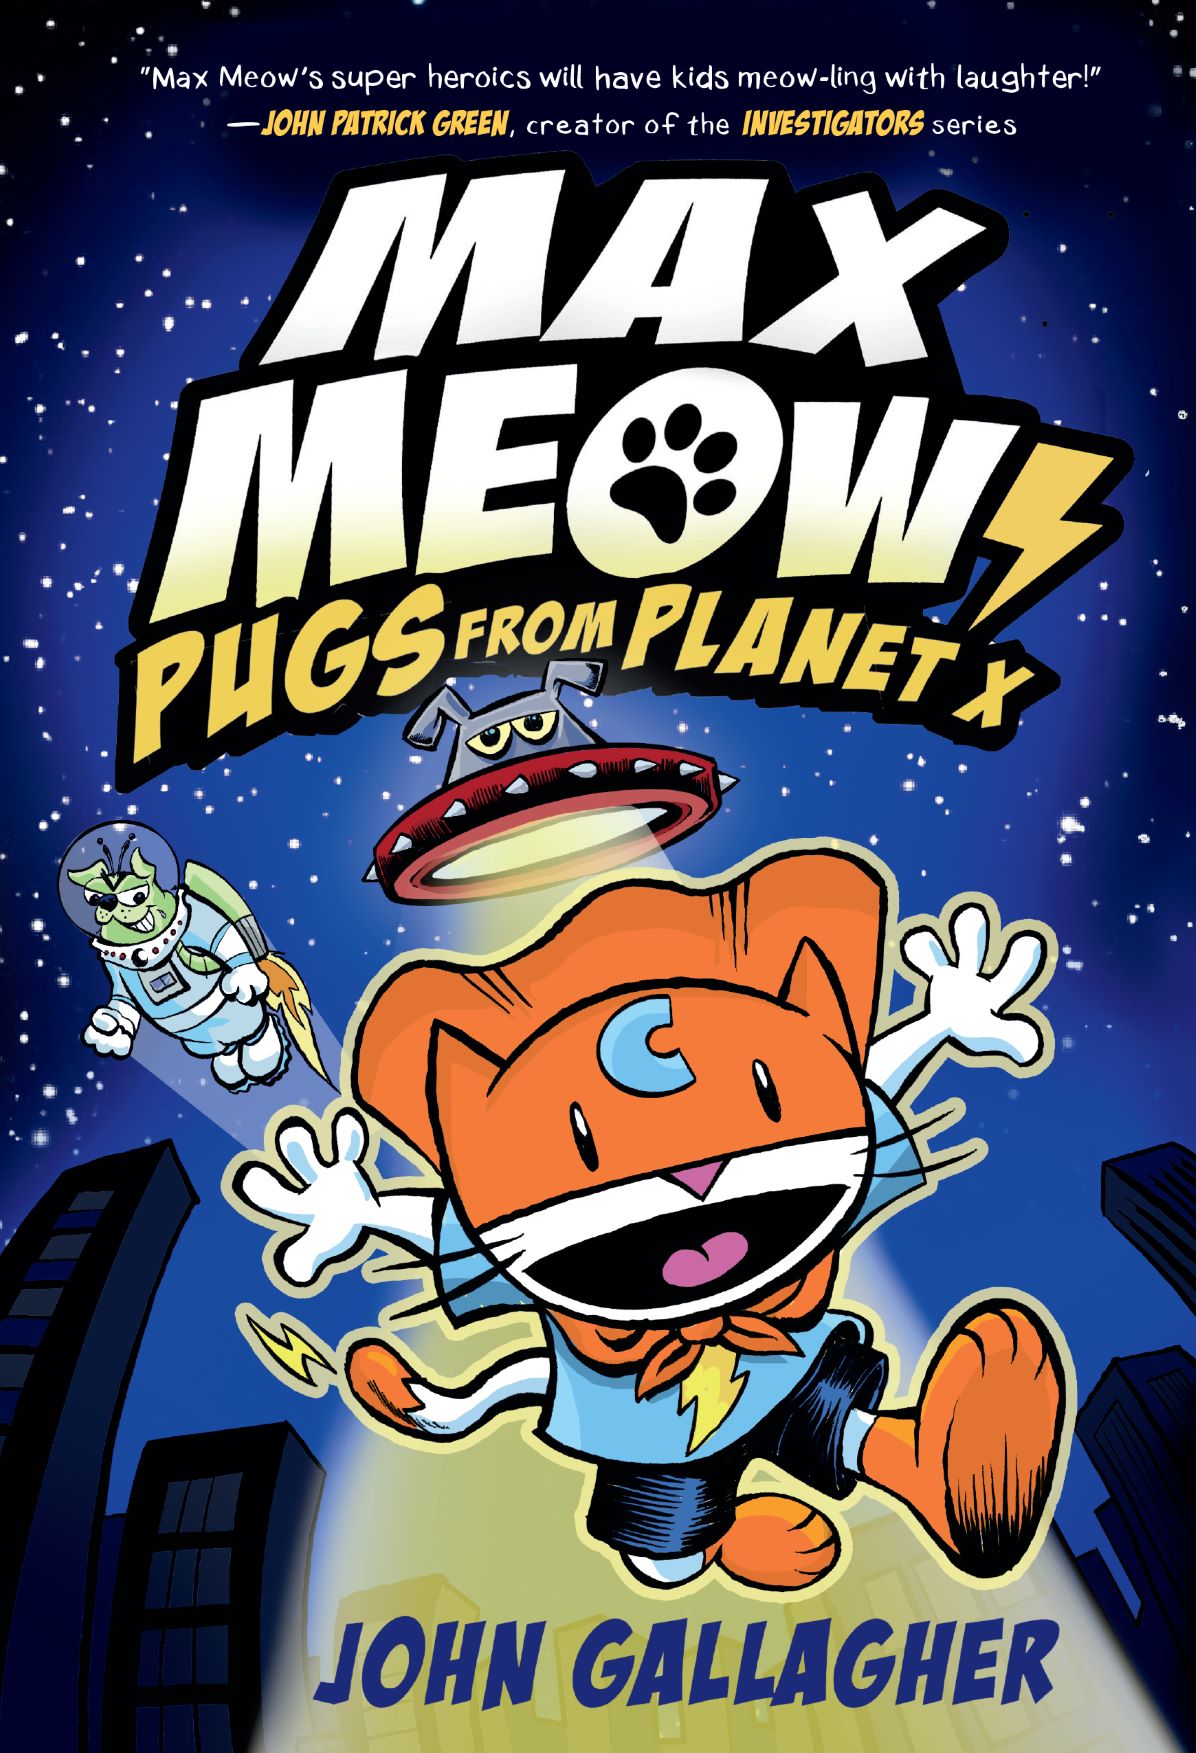 Max Meow Hardcover Graphic Novel Volume 3 Pugs from Planet X